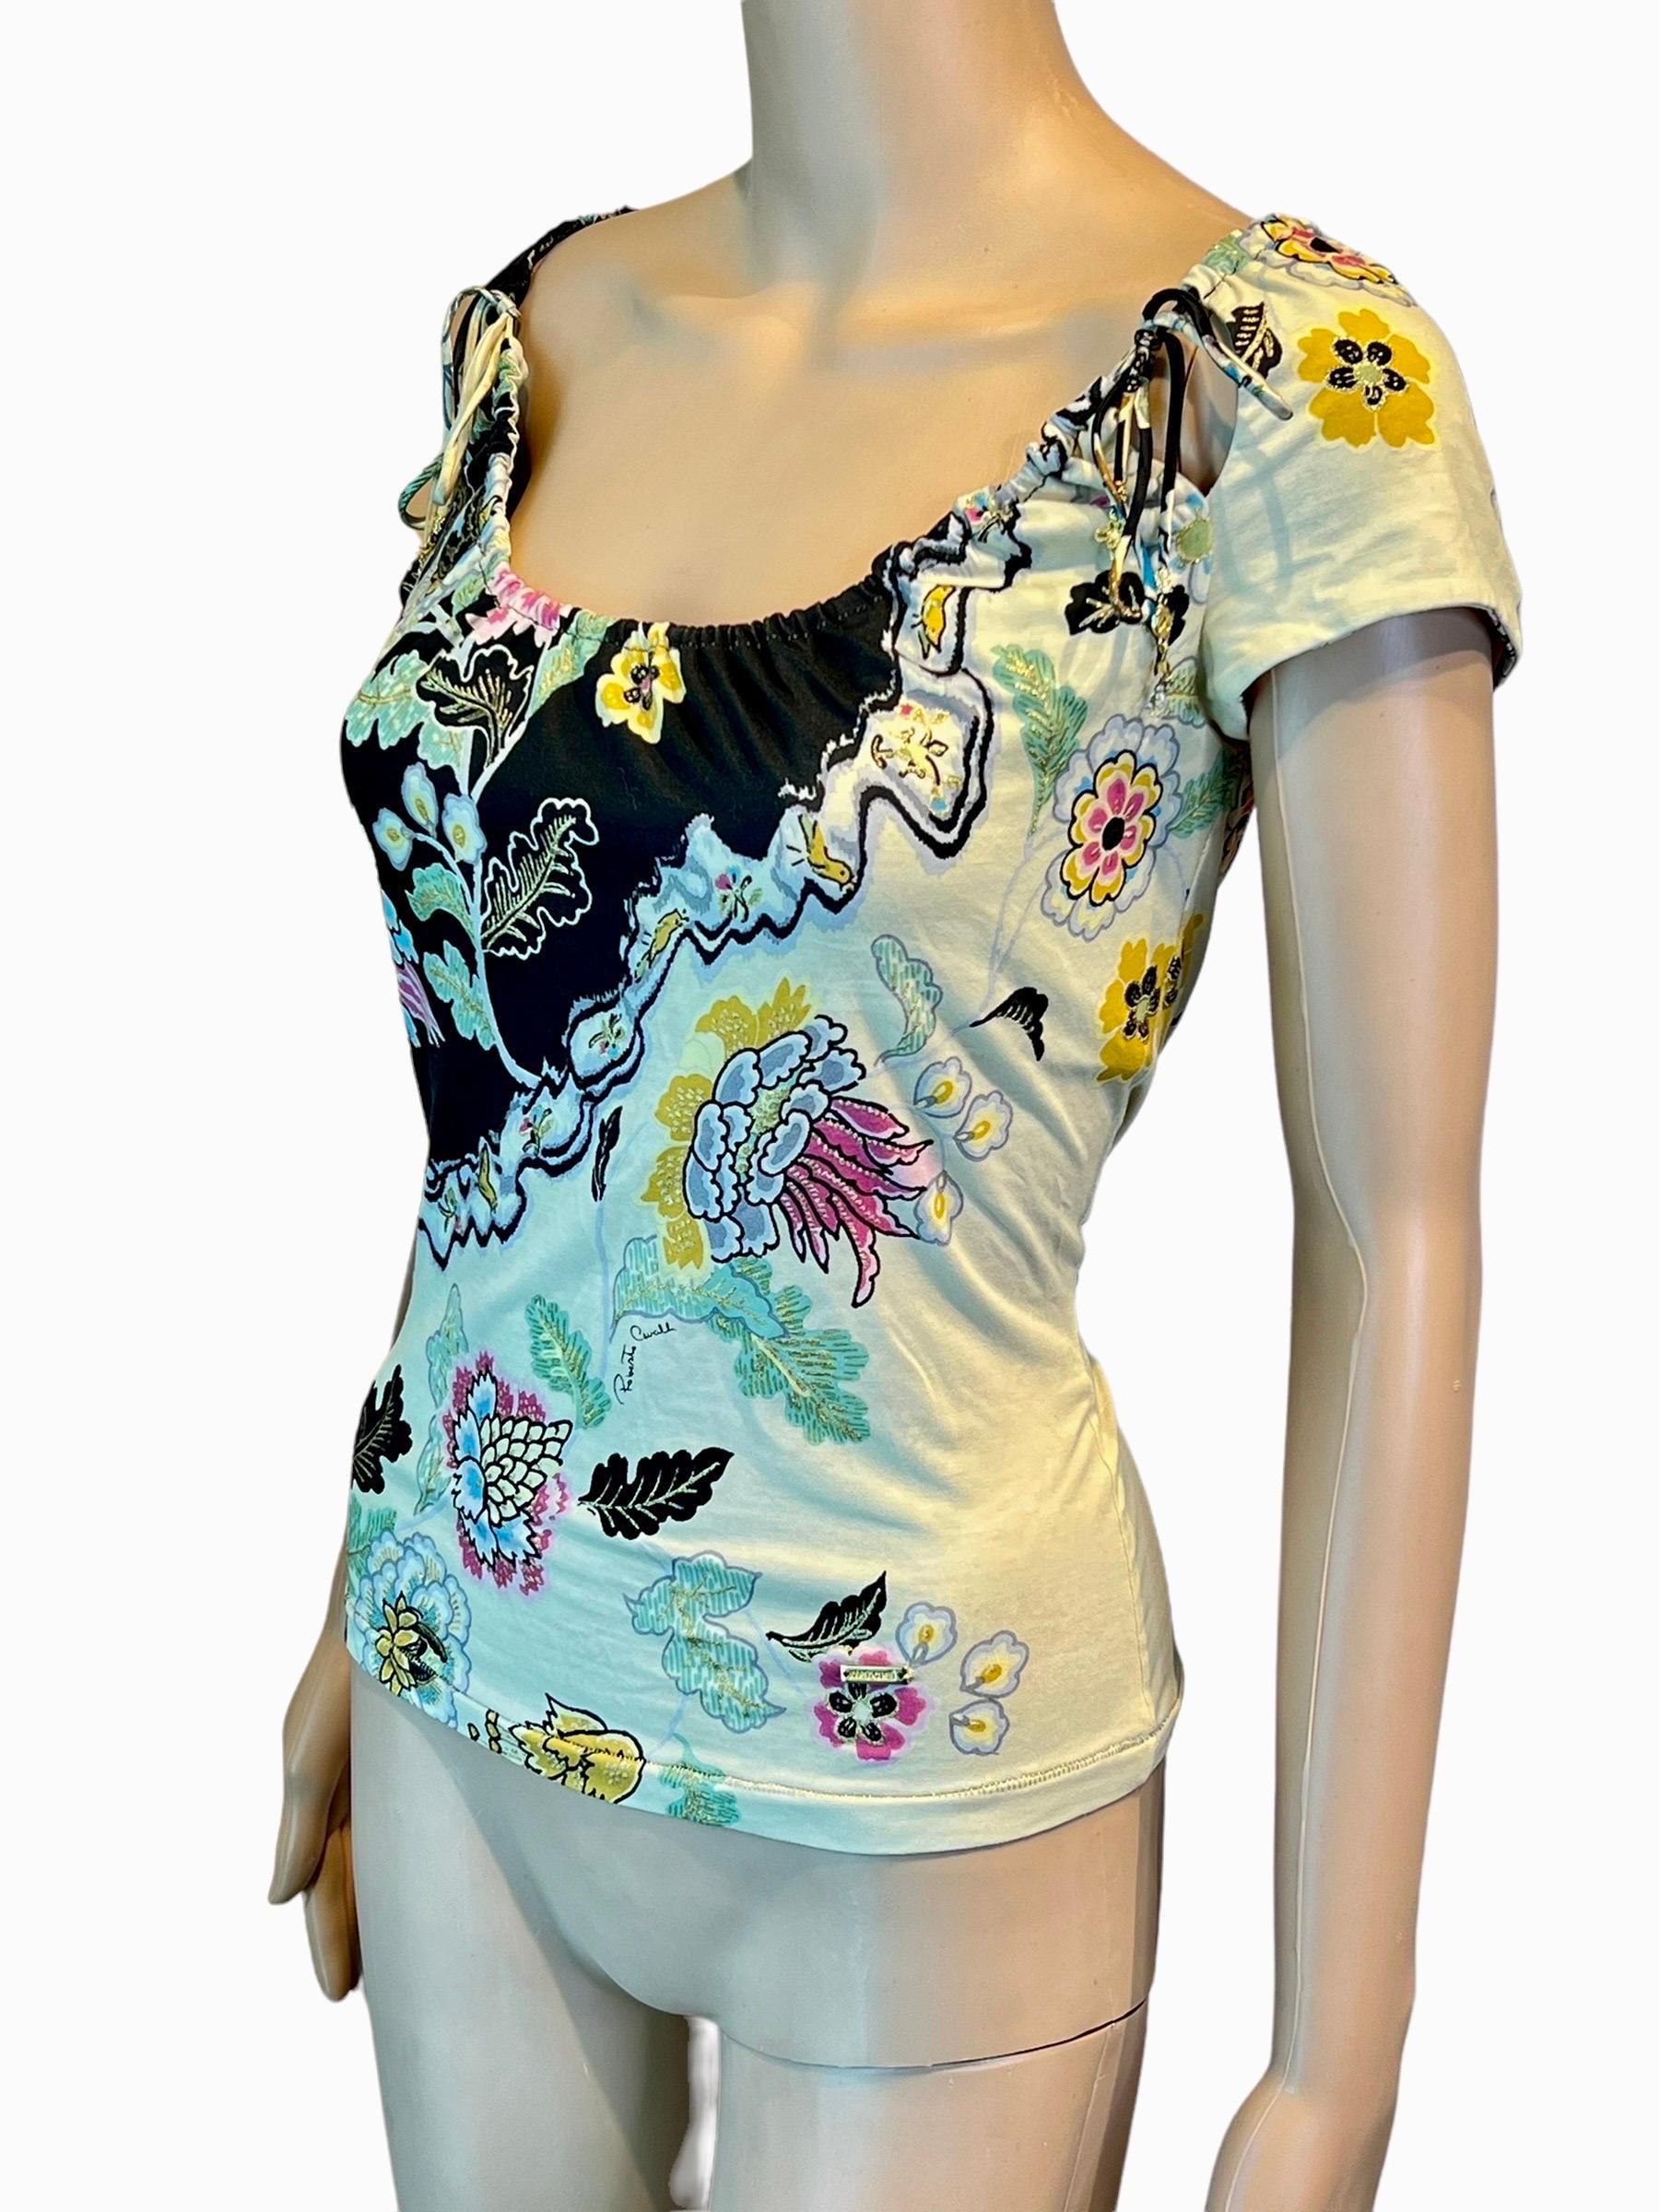 Roberto Cavalli S/S 2003 Chinoiserie Print Cutout Blouse Top In Good Condition For Sale In Naples, FL